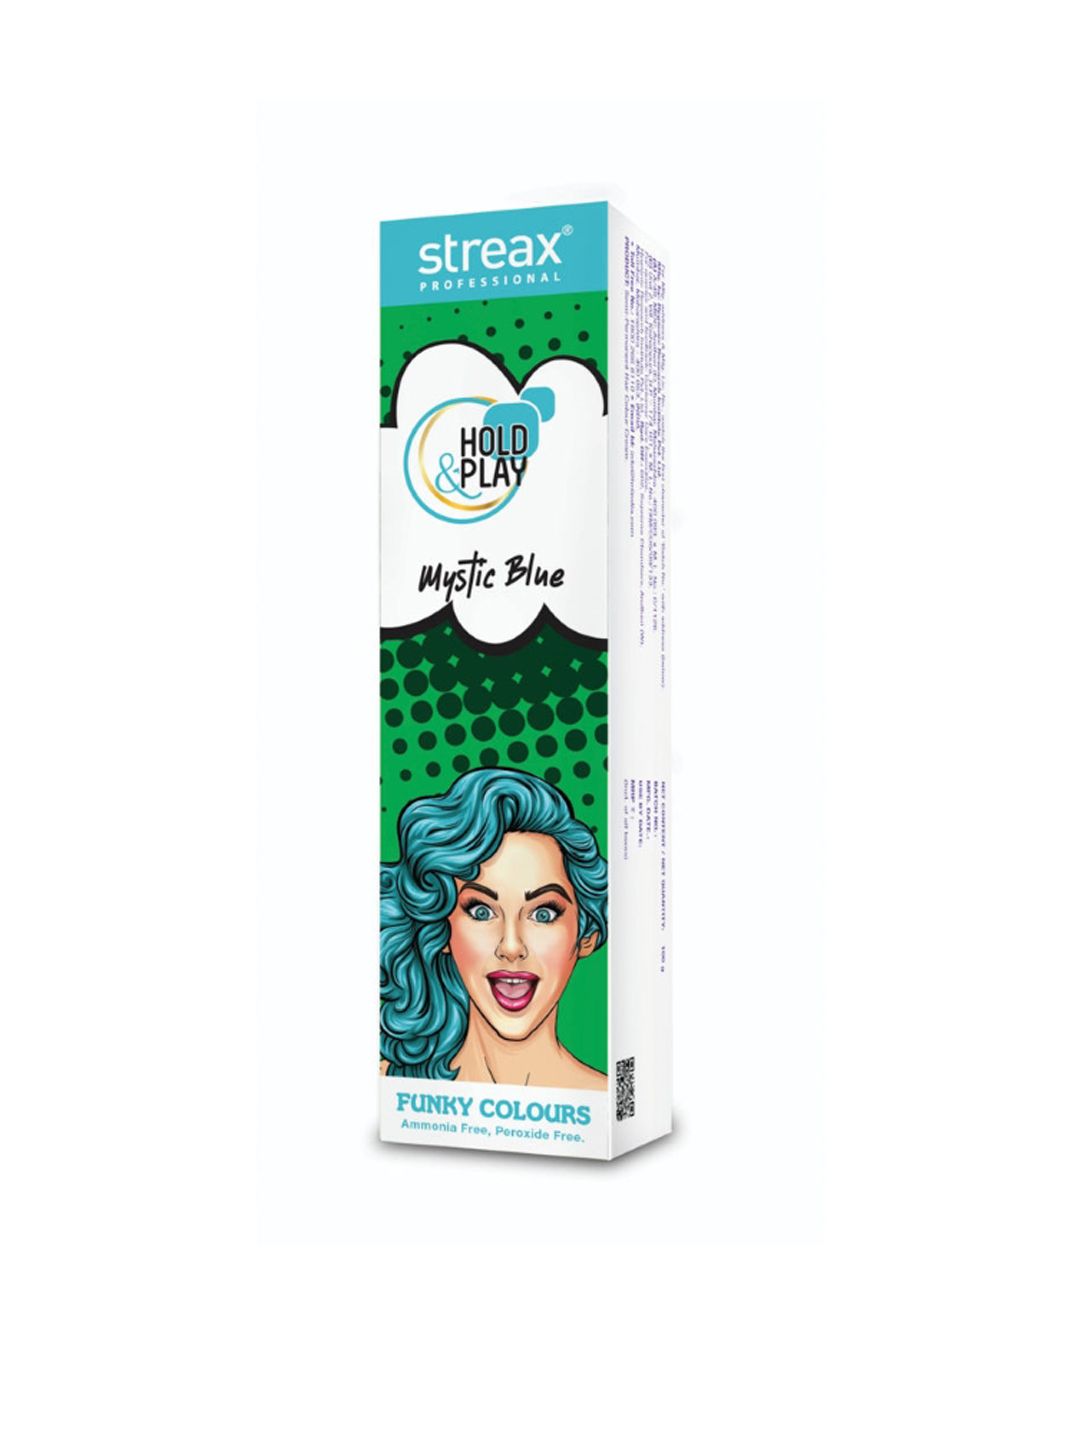 Streax Professional Hold & Play Funky Colours - Mystic Blue- 100 g Price in India